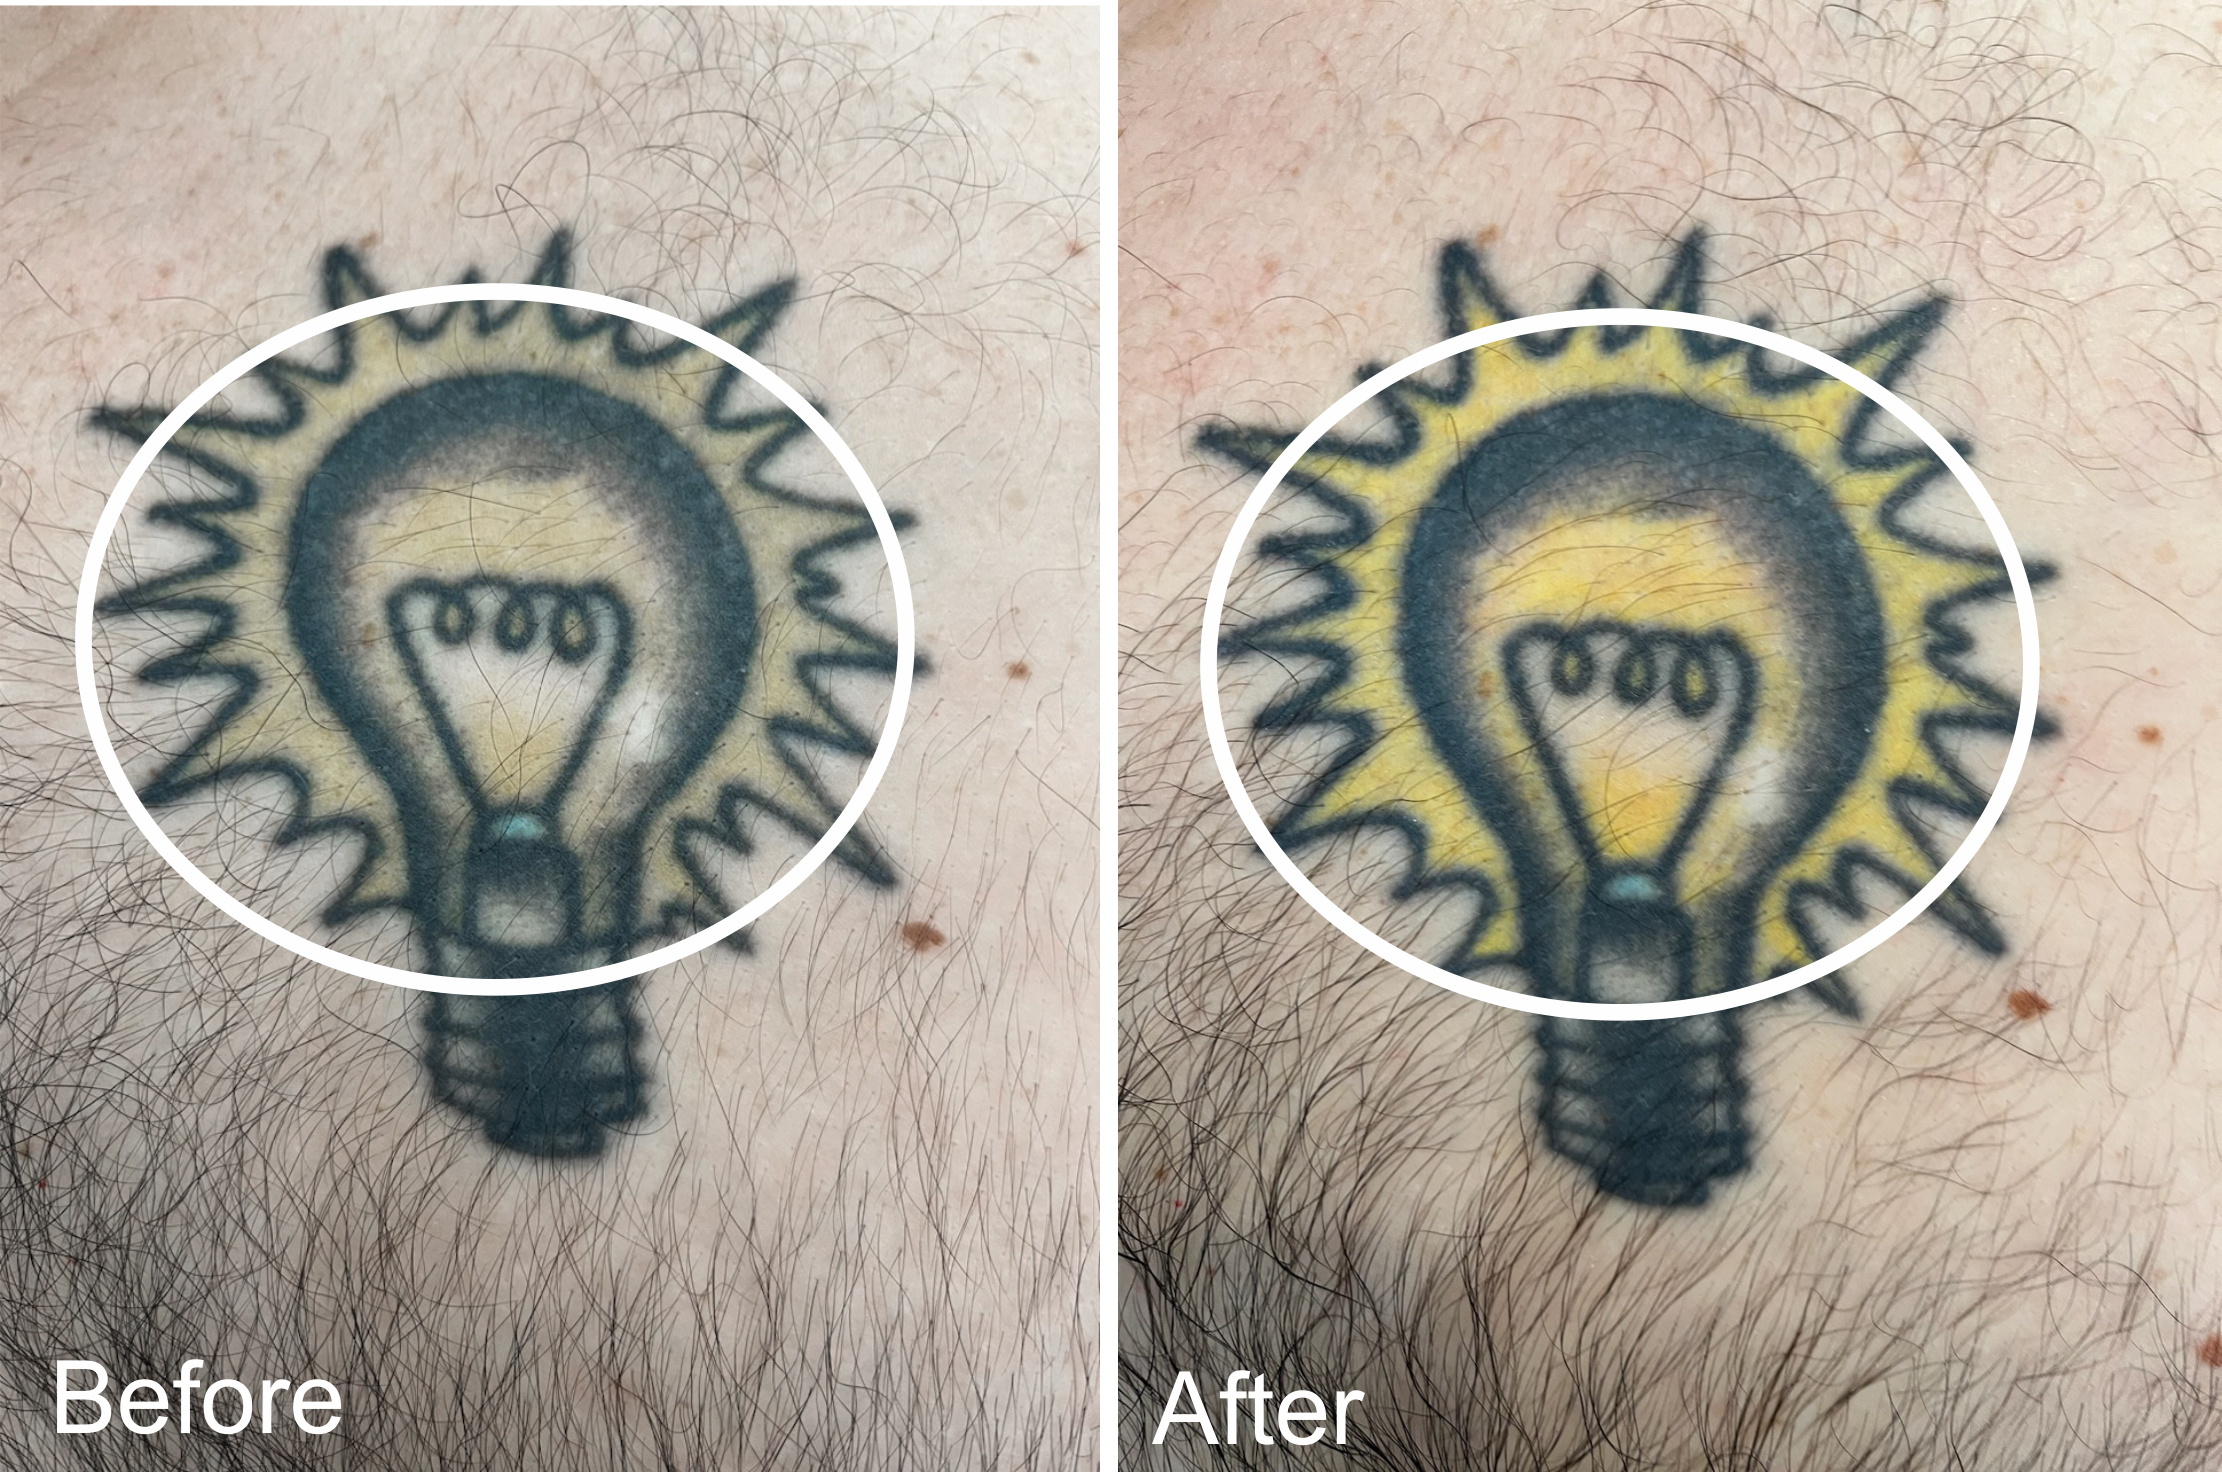 Light bulb Tattoo Before and After